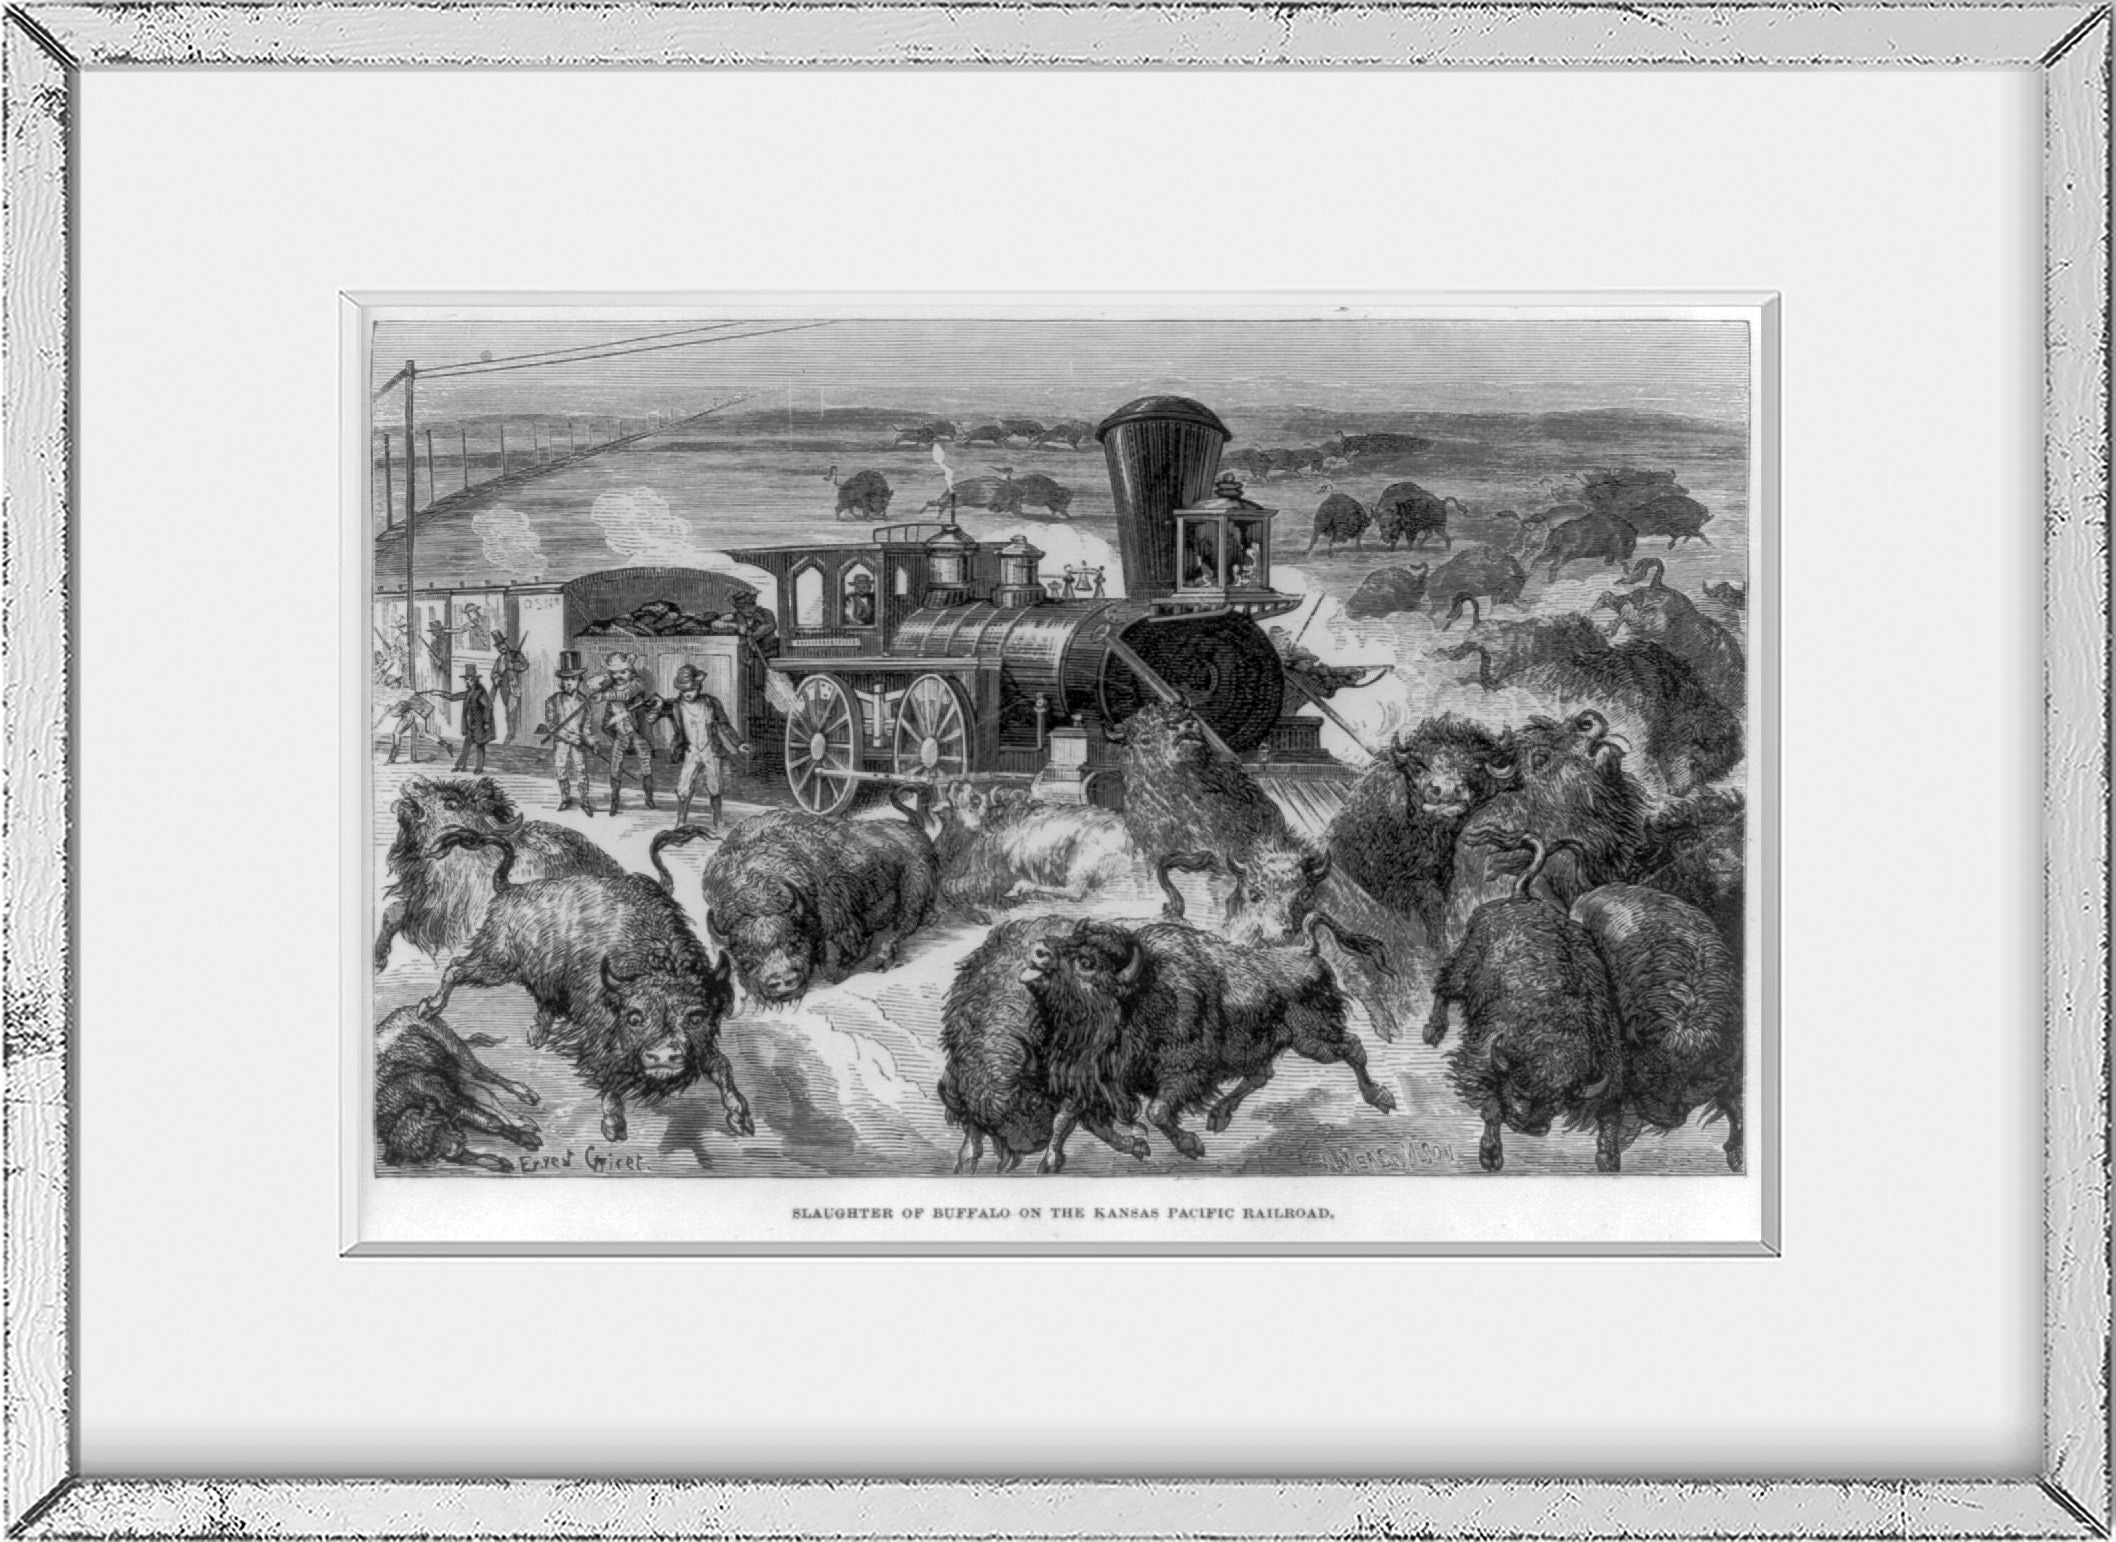 Photo: Slaughter of Buffalo on The Kansas Pacific Railroad, Ernest Griest, W. Meas